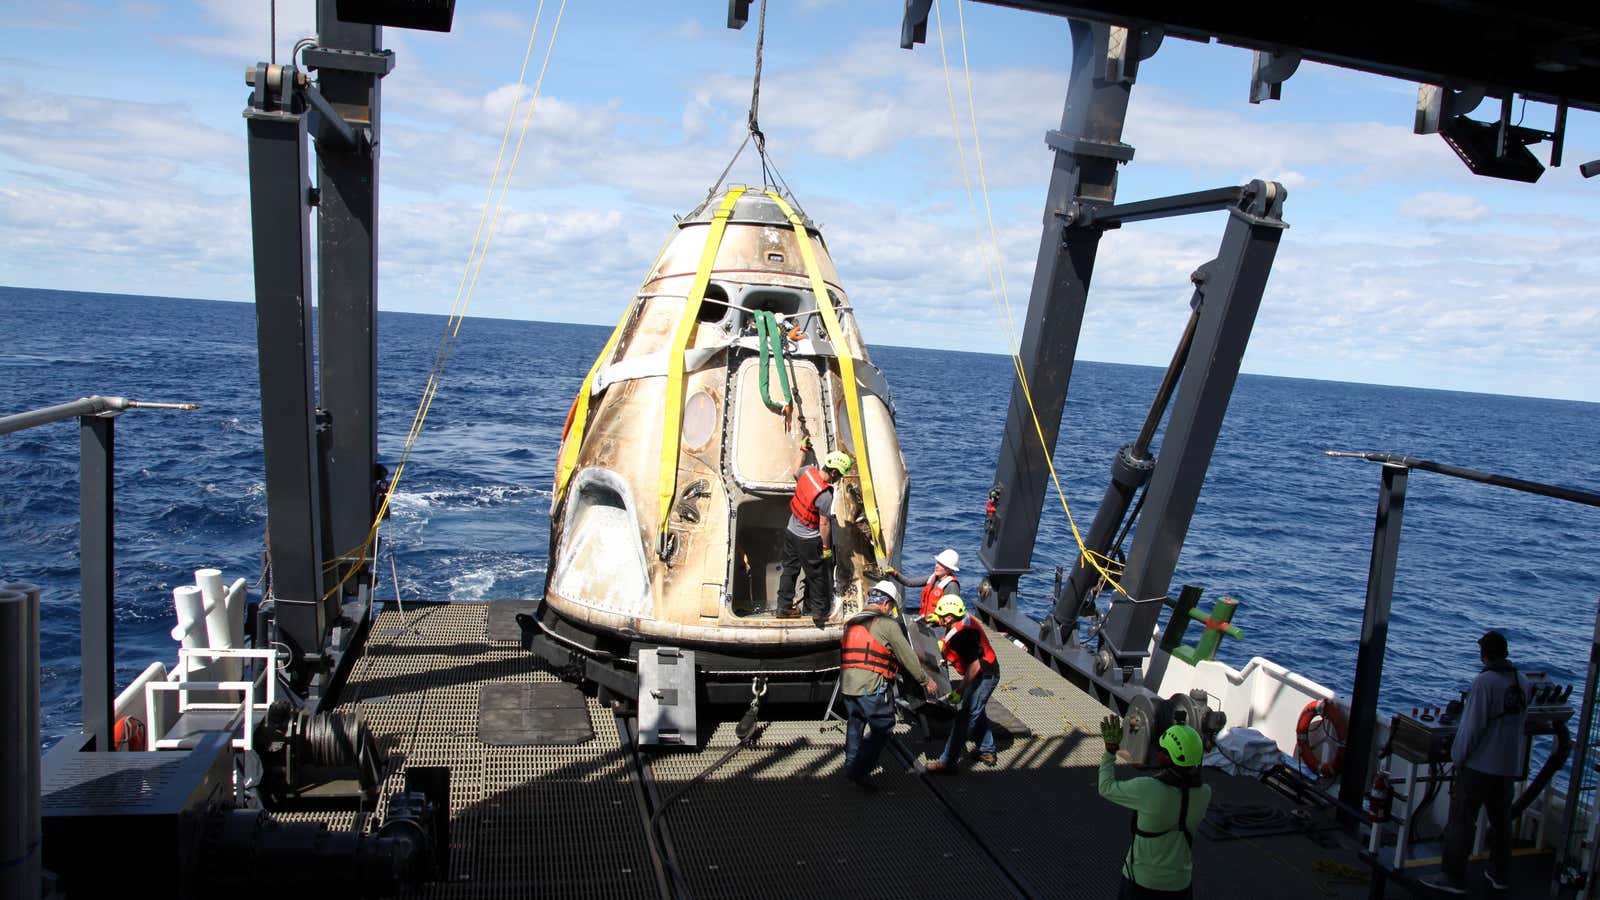 SpaceX workers recover the Dragon spacecraft from the Atlantic after it returned from space in March 2019.